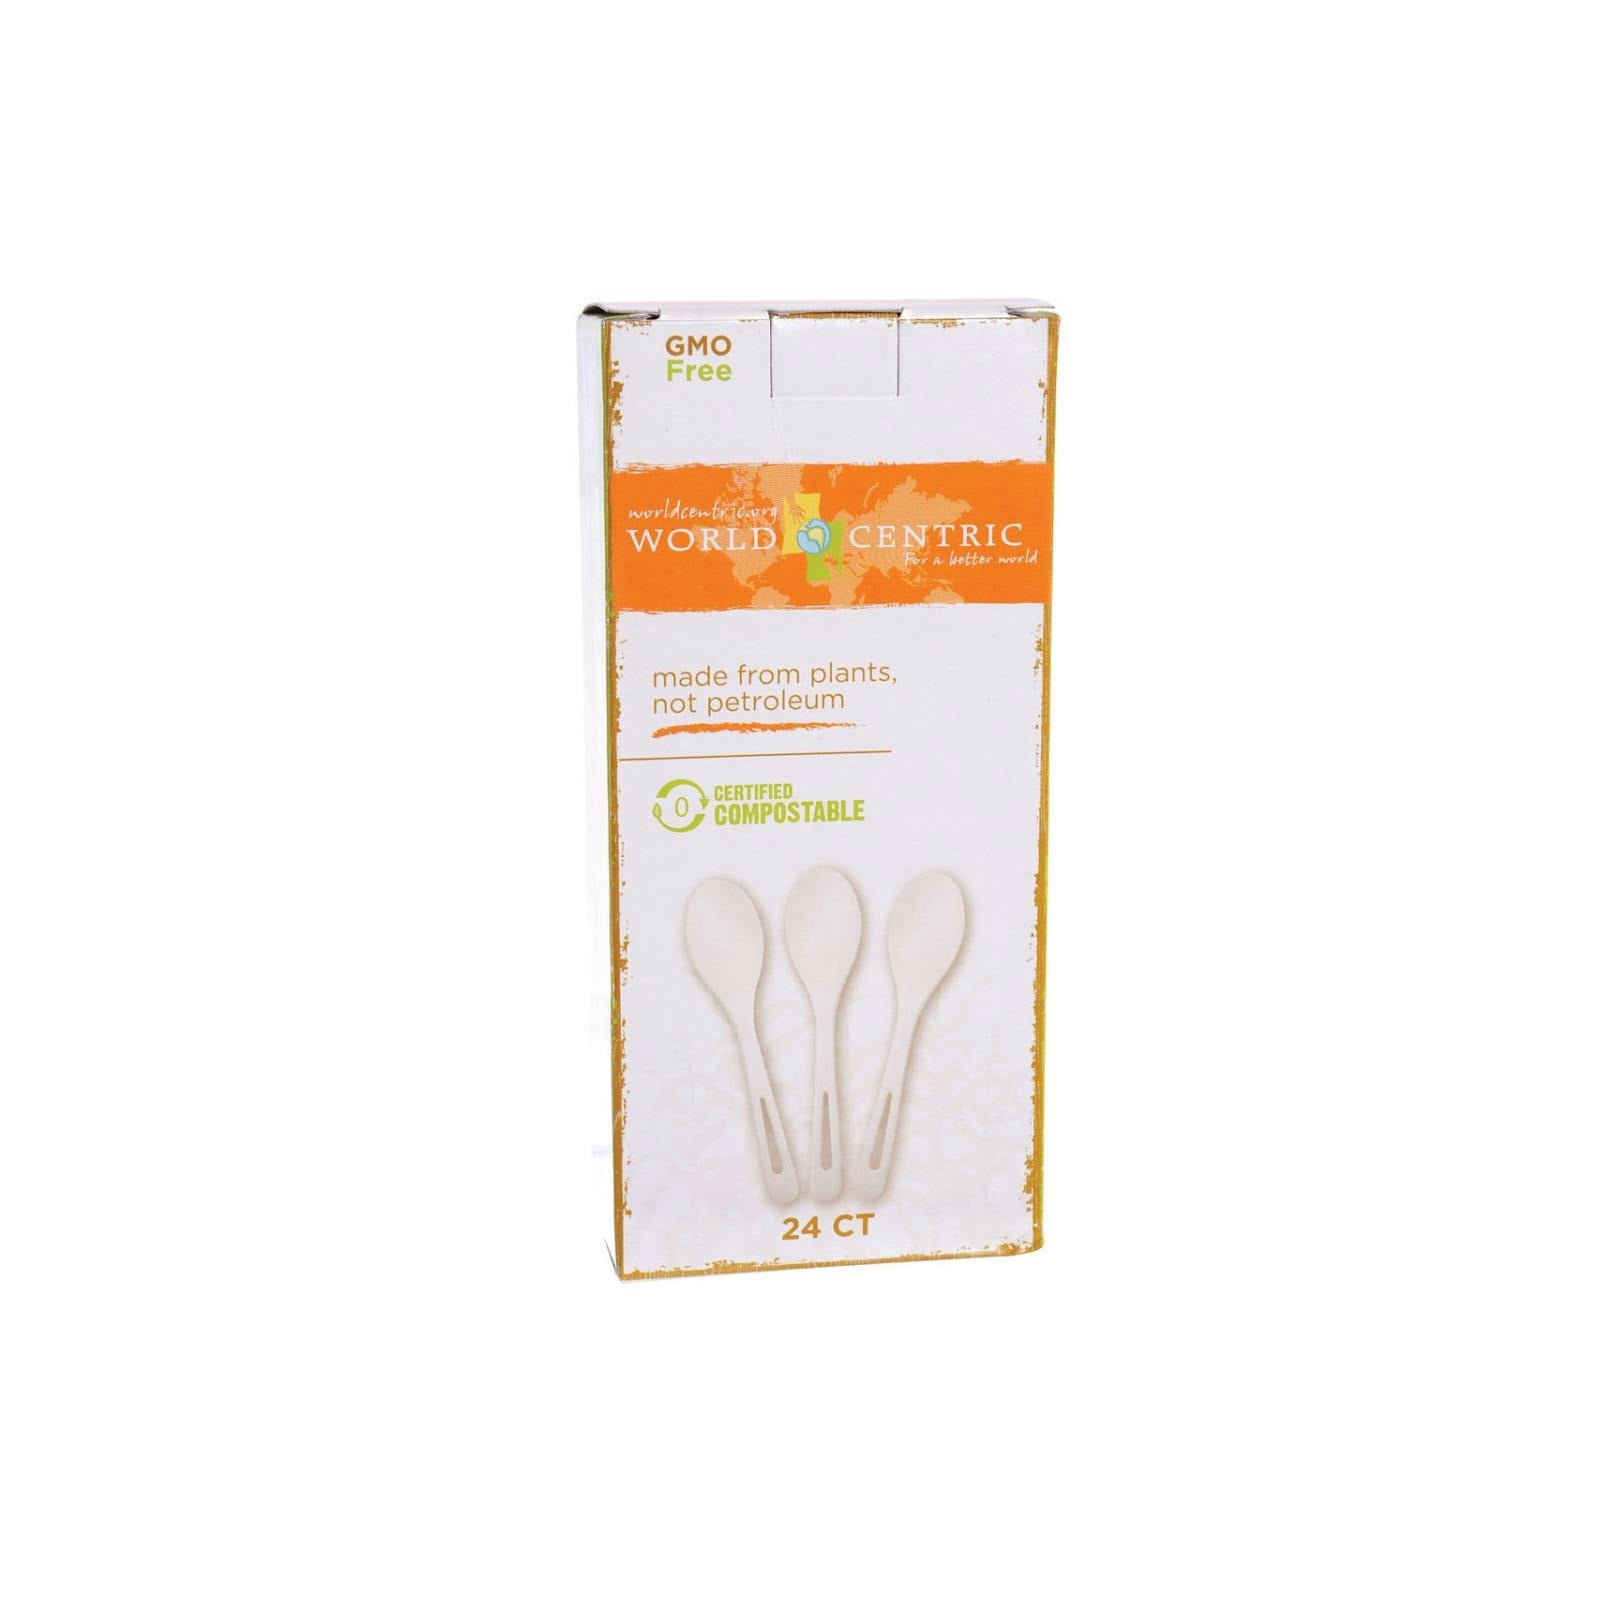 World Centric Cornstarch Compostable Spoon 24 Count (Pack of 12)